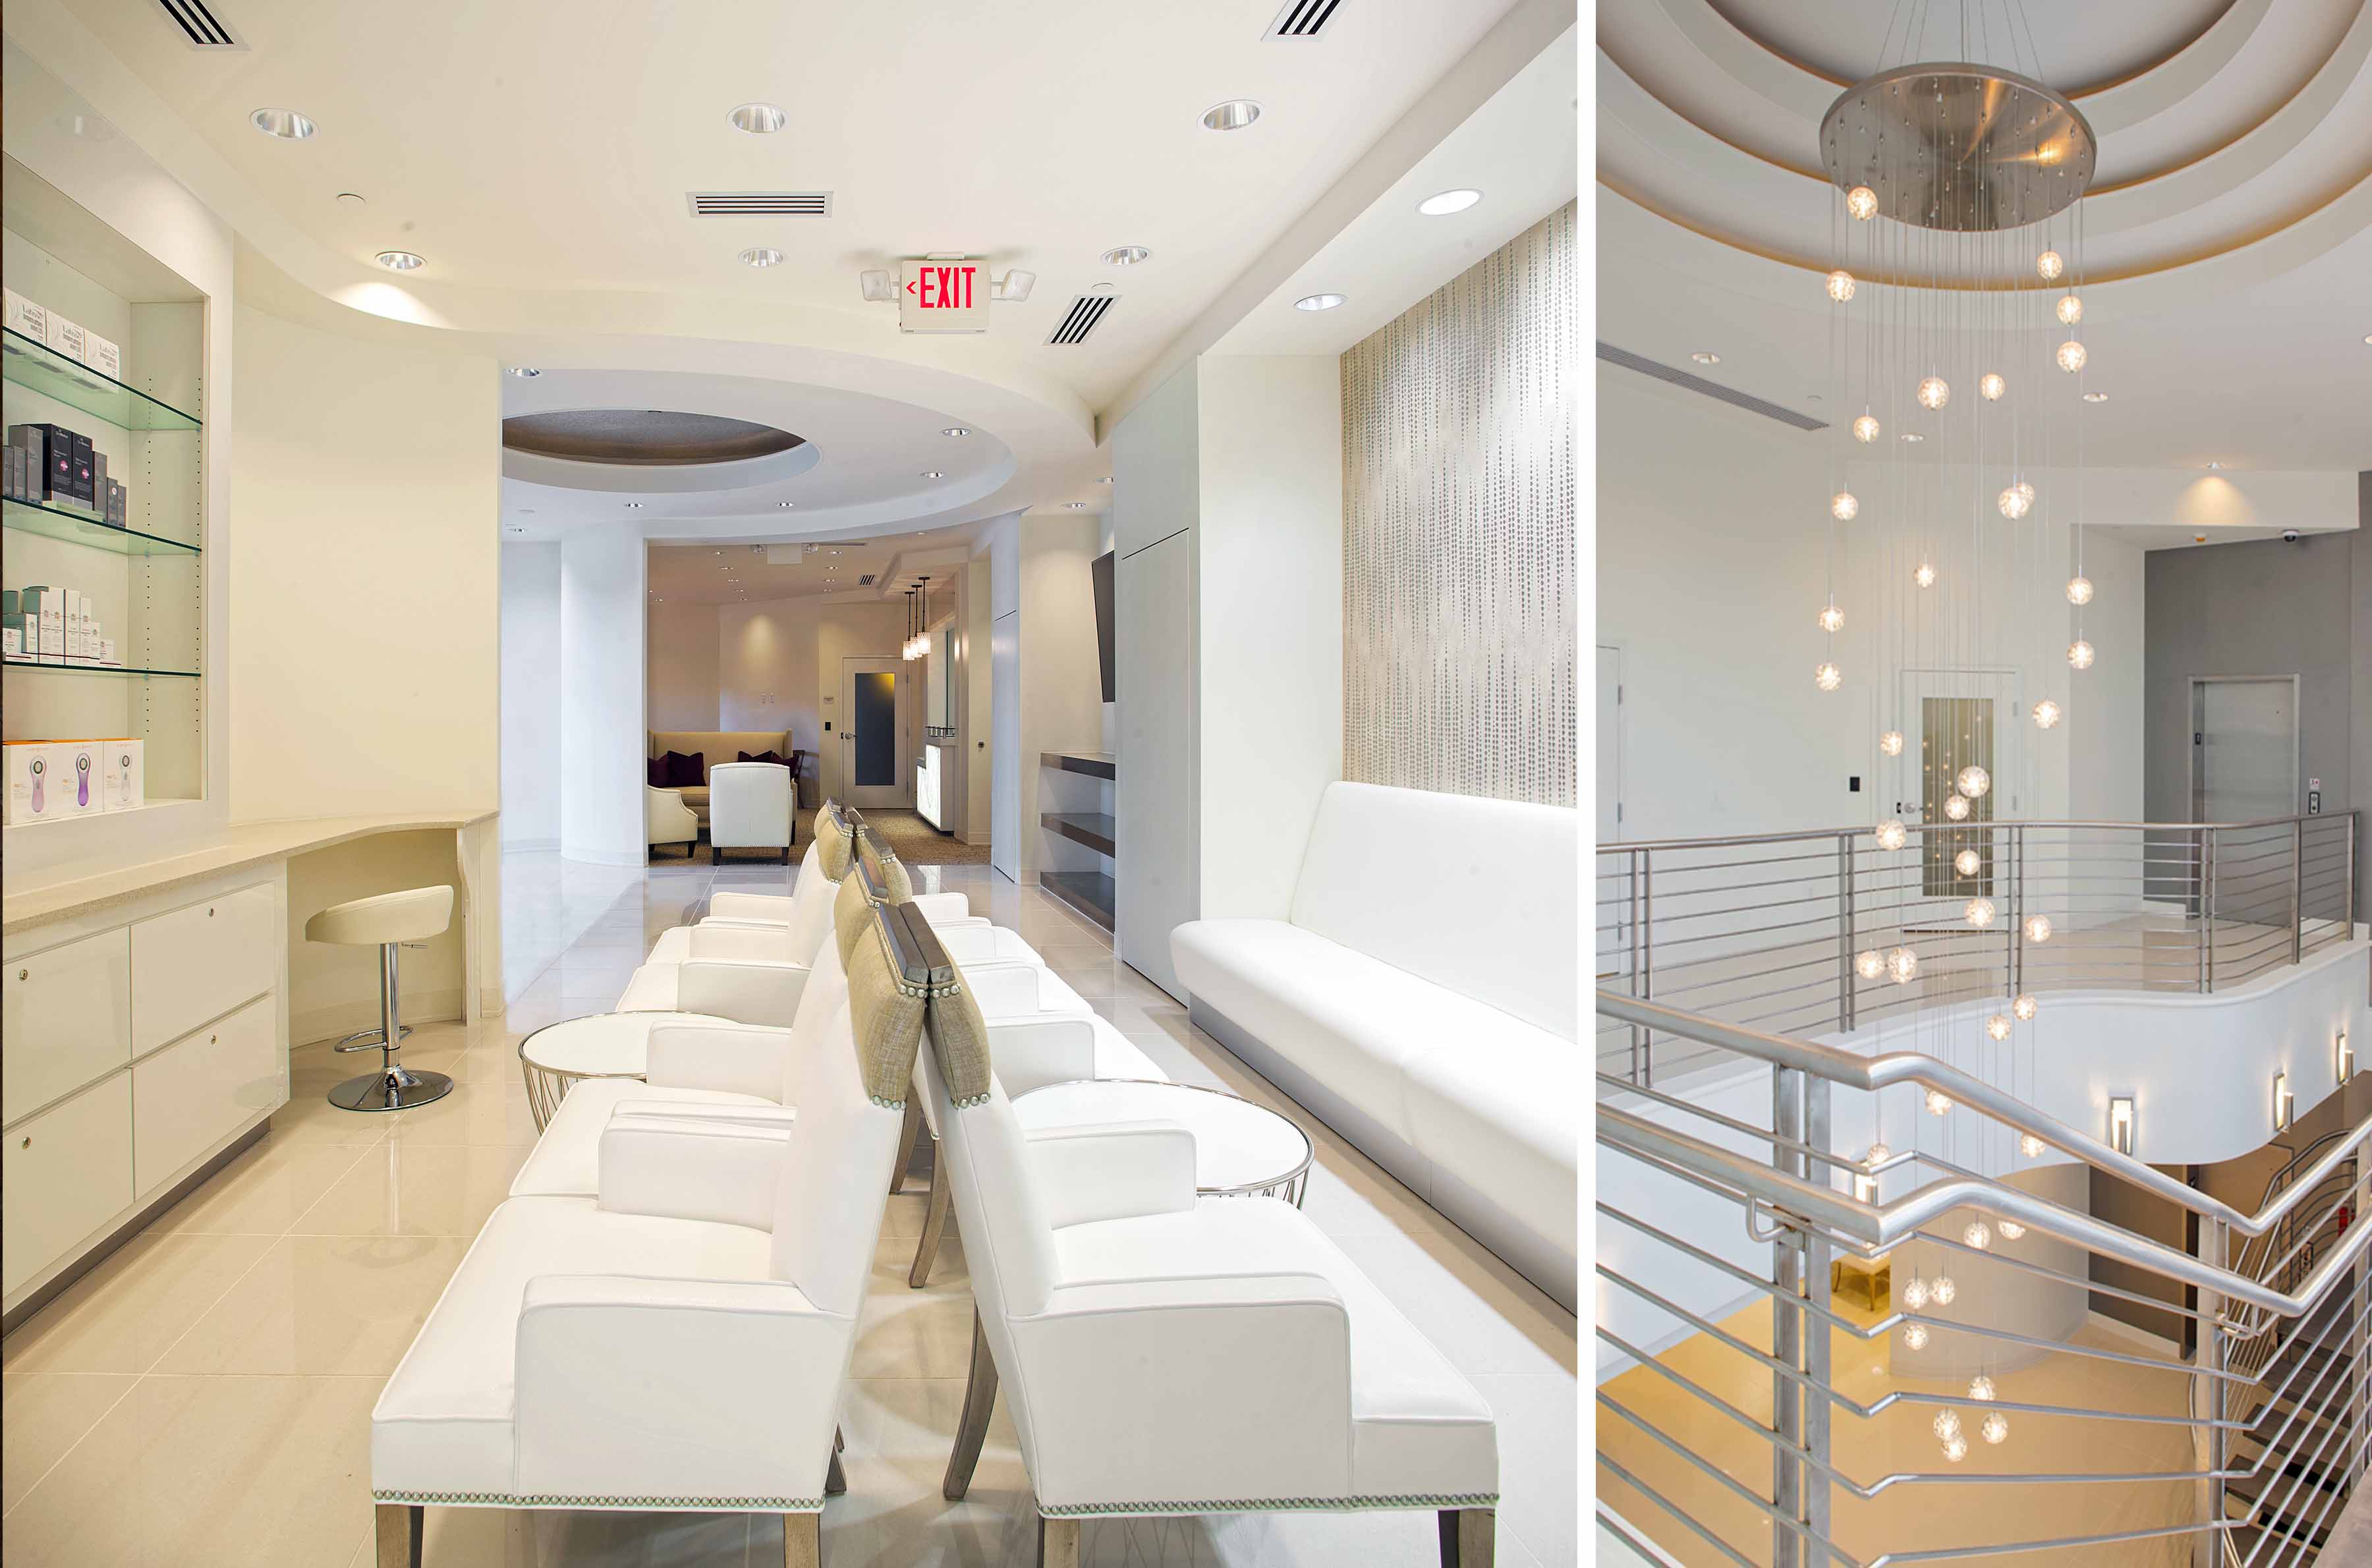 commercial interior design by the J Banks Design Group includes this Lux Medical Spa with a crisp contemporary feel